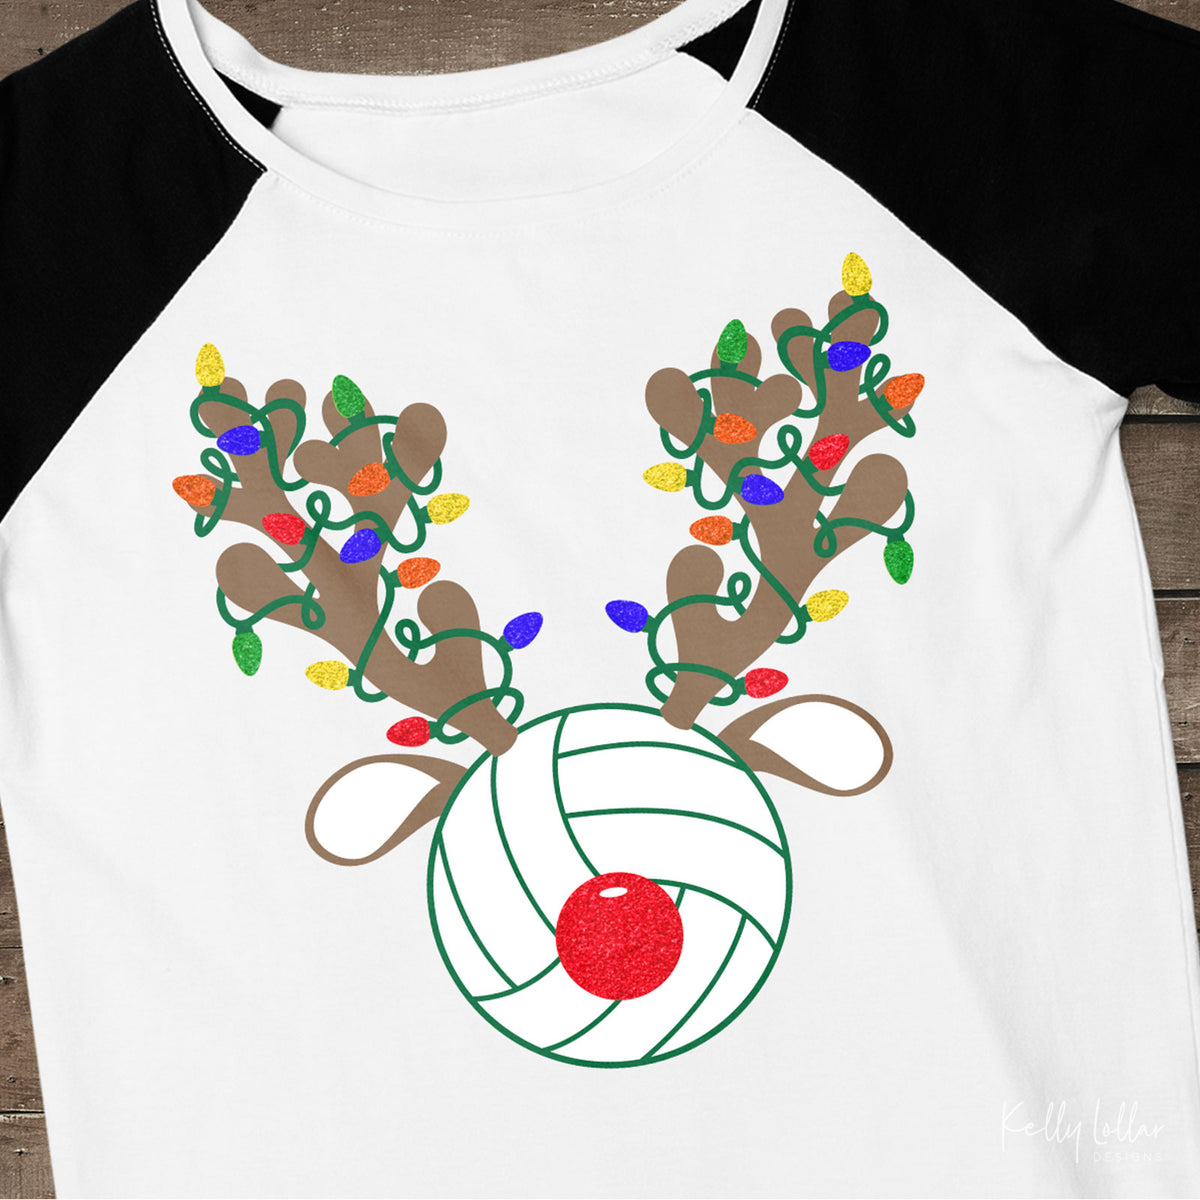 Christmas Light Wrapped Reindeer Antlers and Ears on a Volleyball for Holiday Shirts and Decor | SVG DXF PNG Cut Files